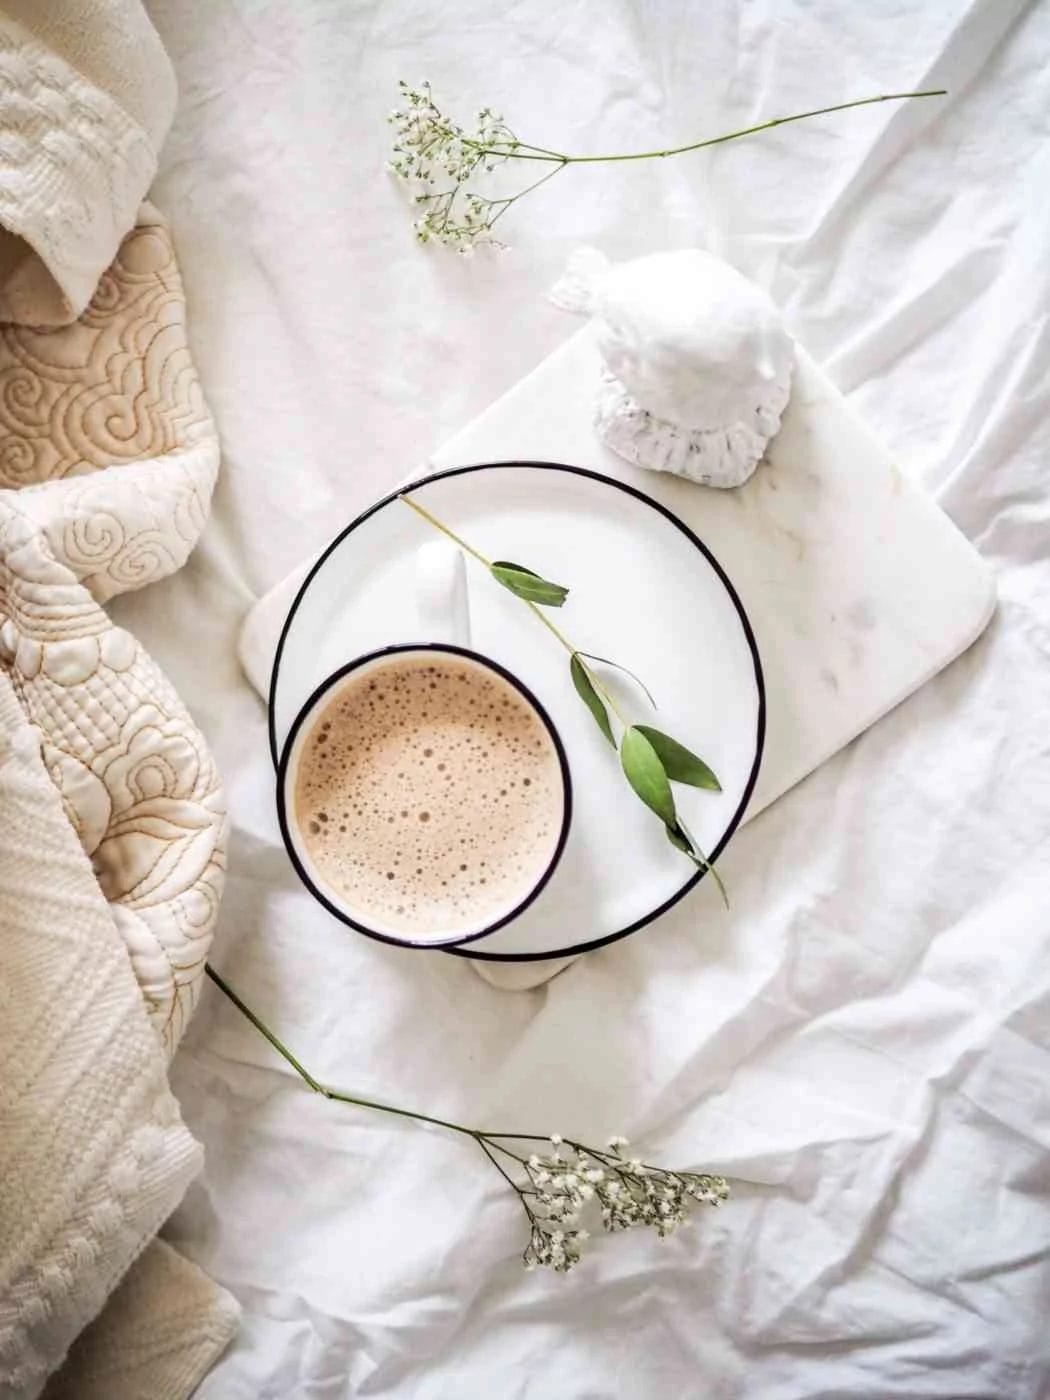 concept image for a mindful morning routine - flat-lay image of a cup of coffee on a bed